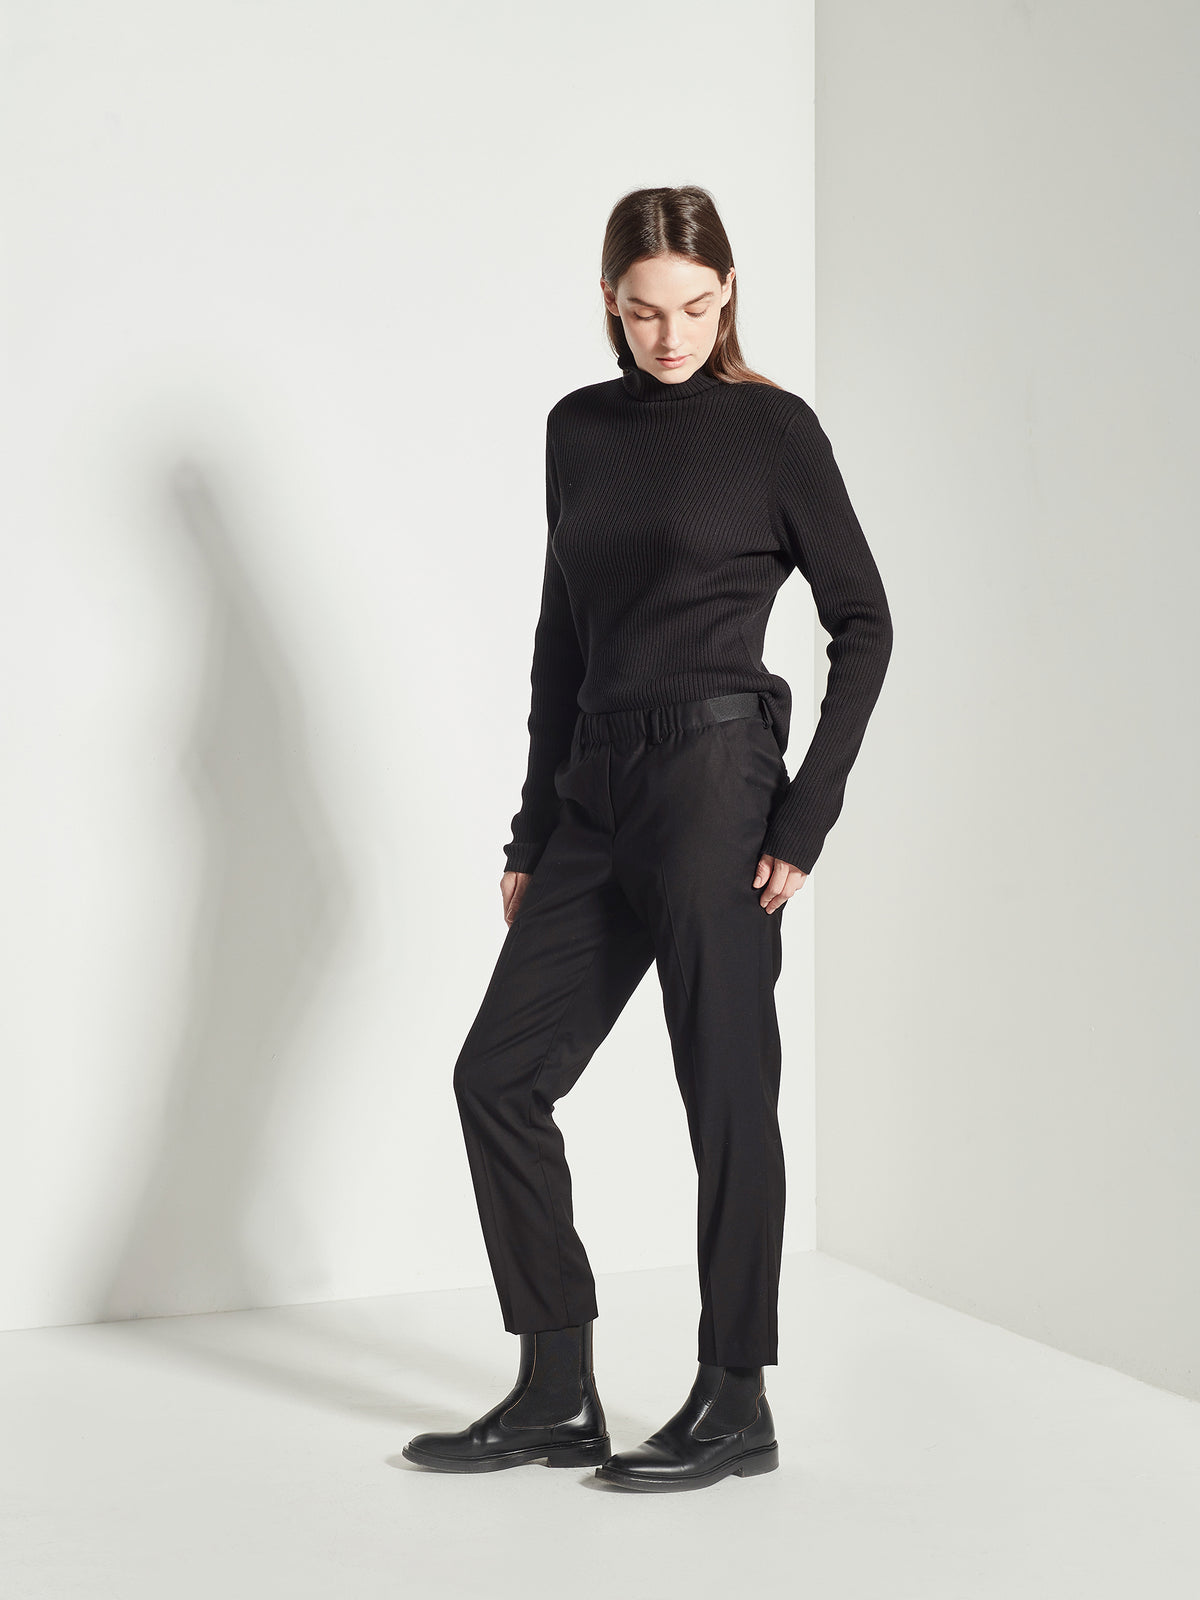 Complete Pant (Soft Suiting) Black